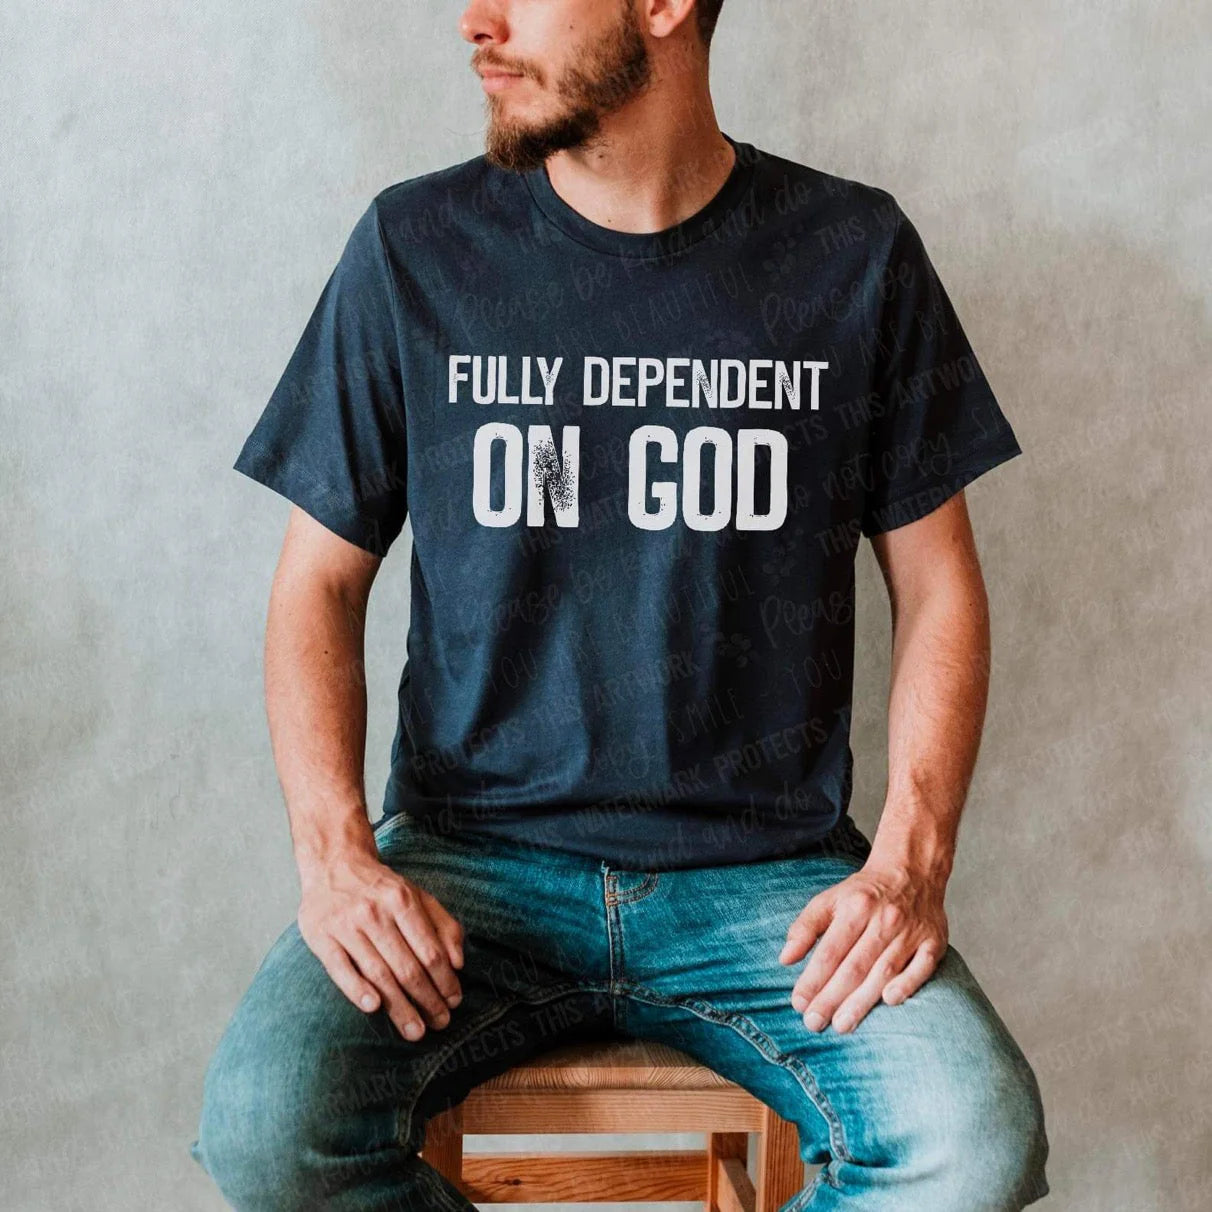 Fully dependent on God - Completed Tee